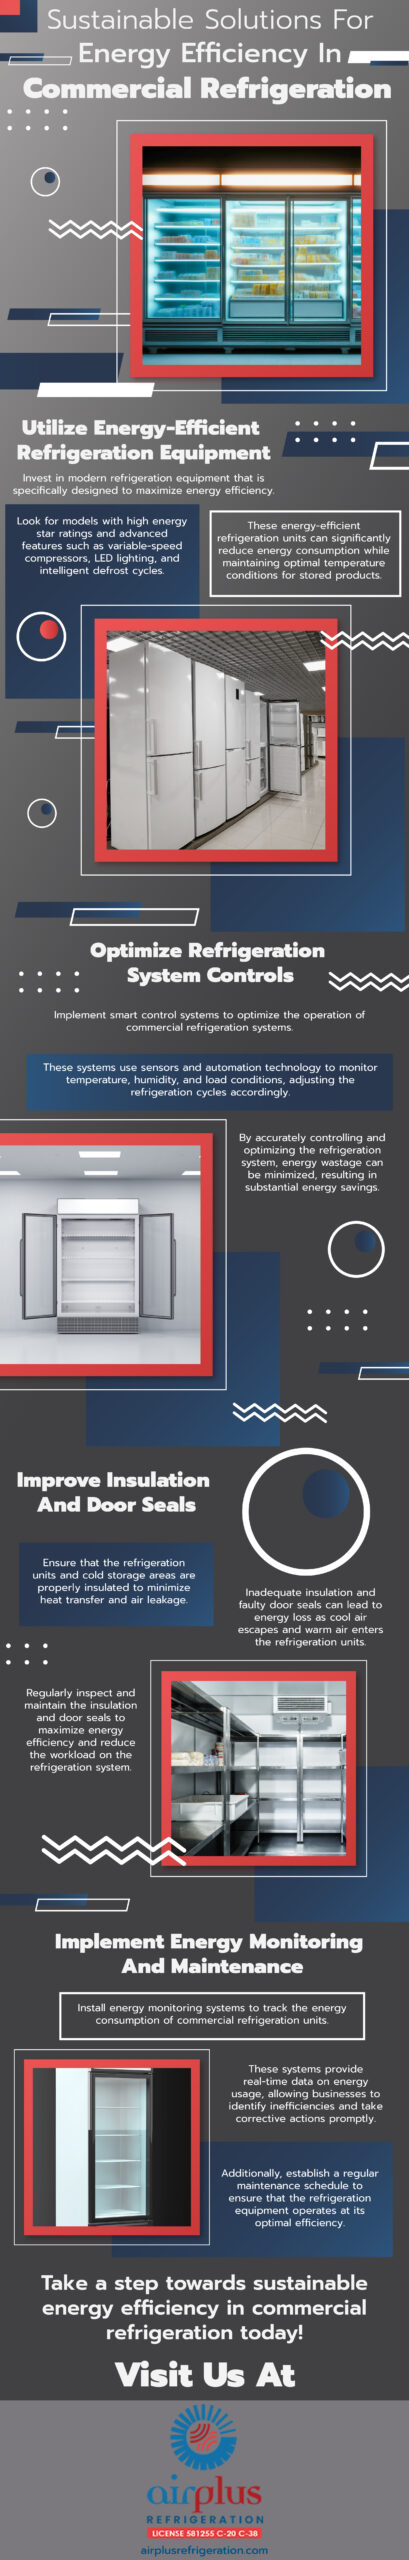 Sustainable Solutions for Energy Efficiency in Commercial Refrigeration